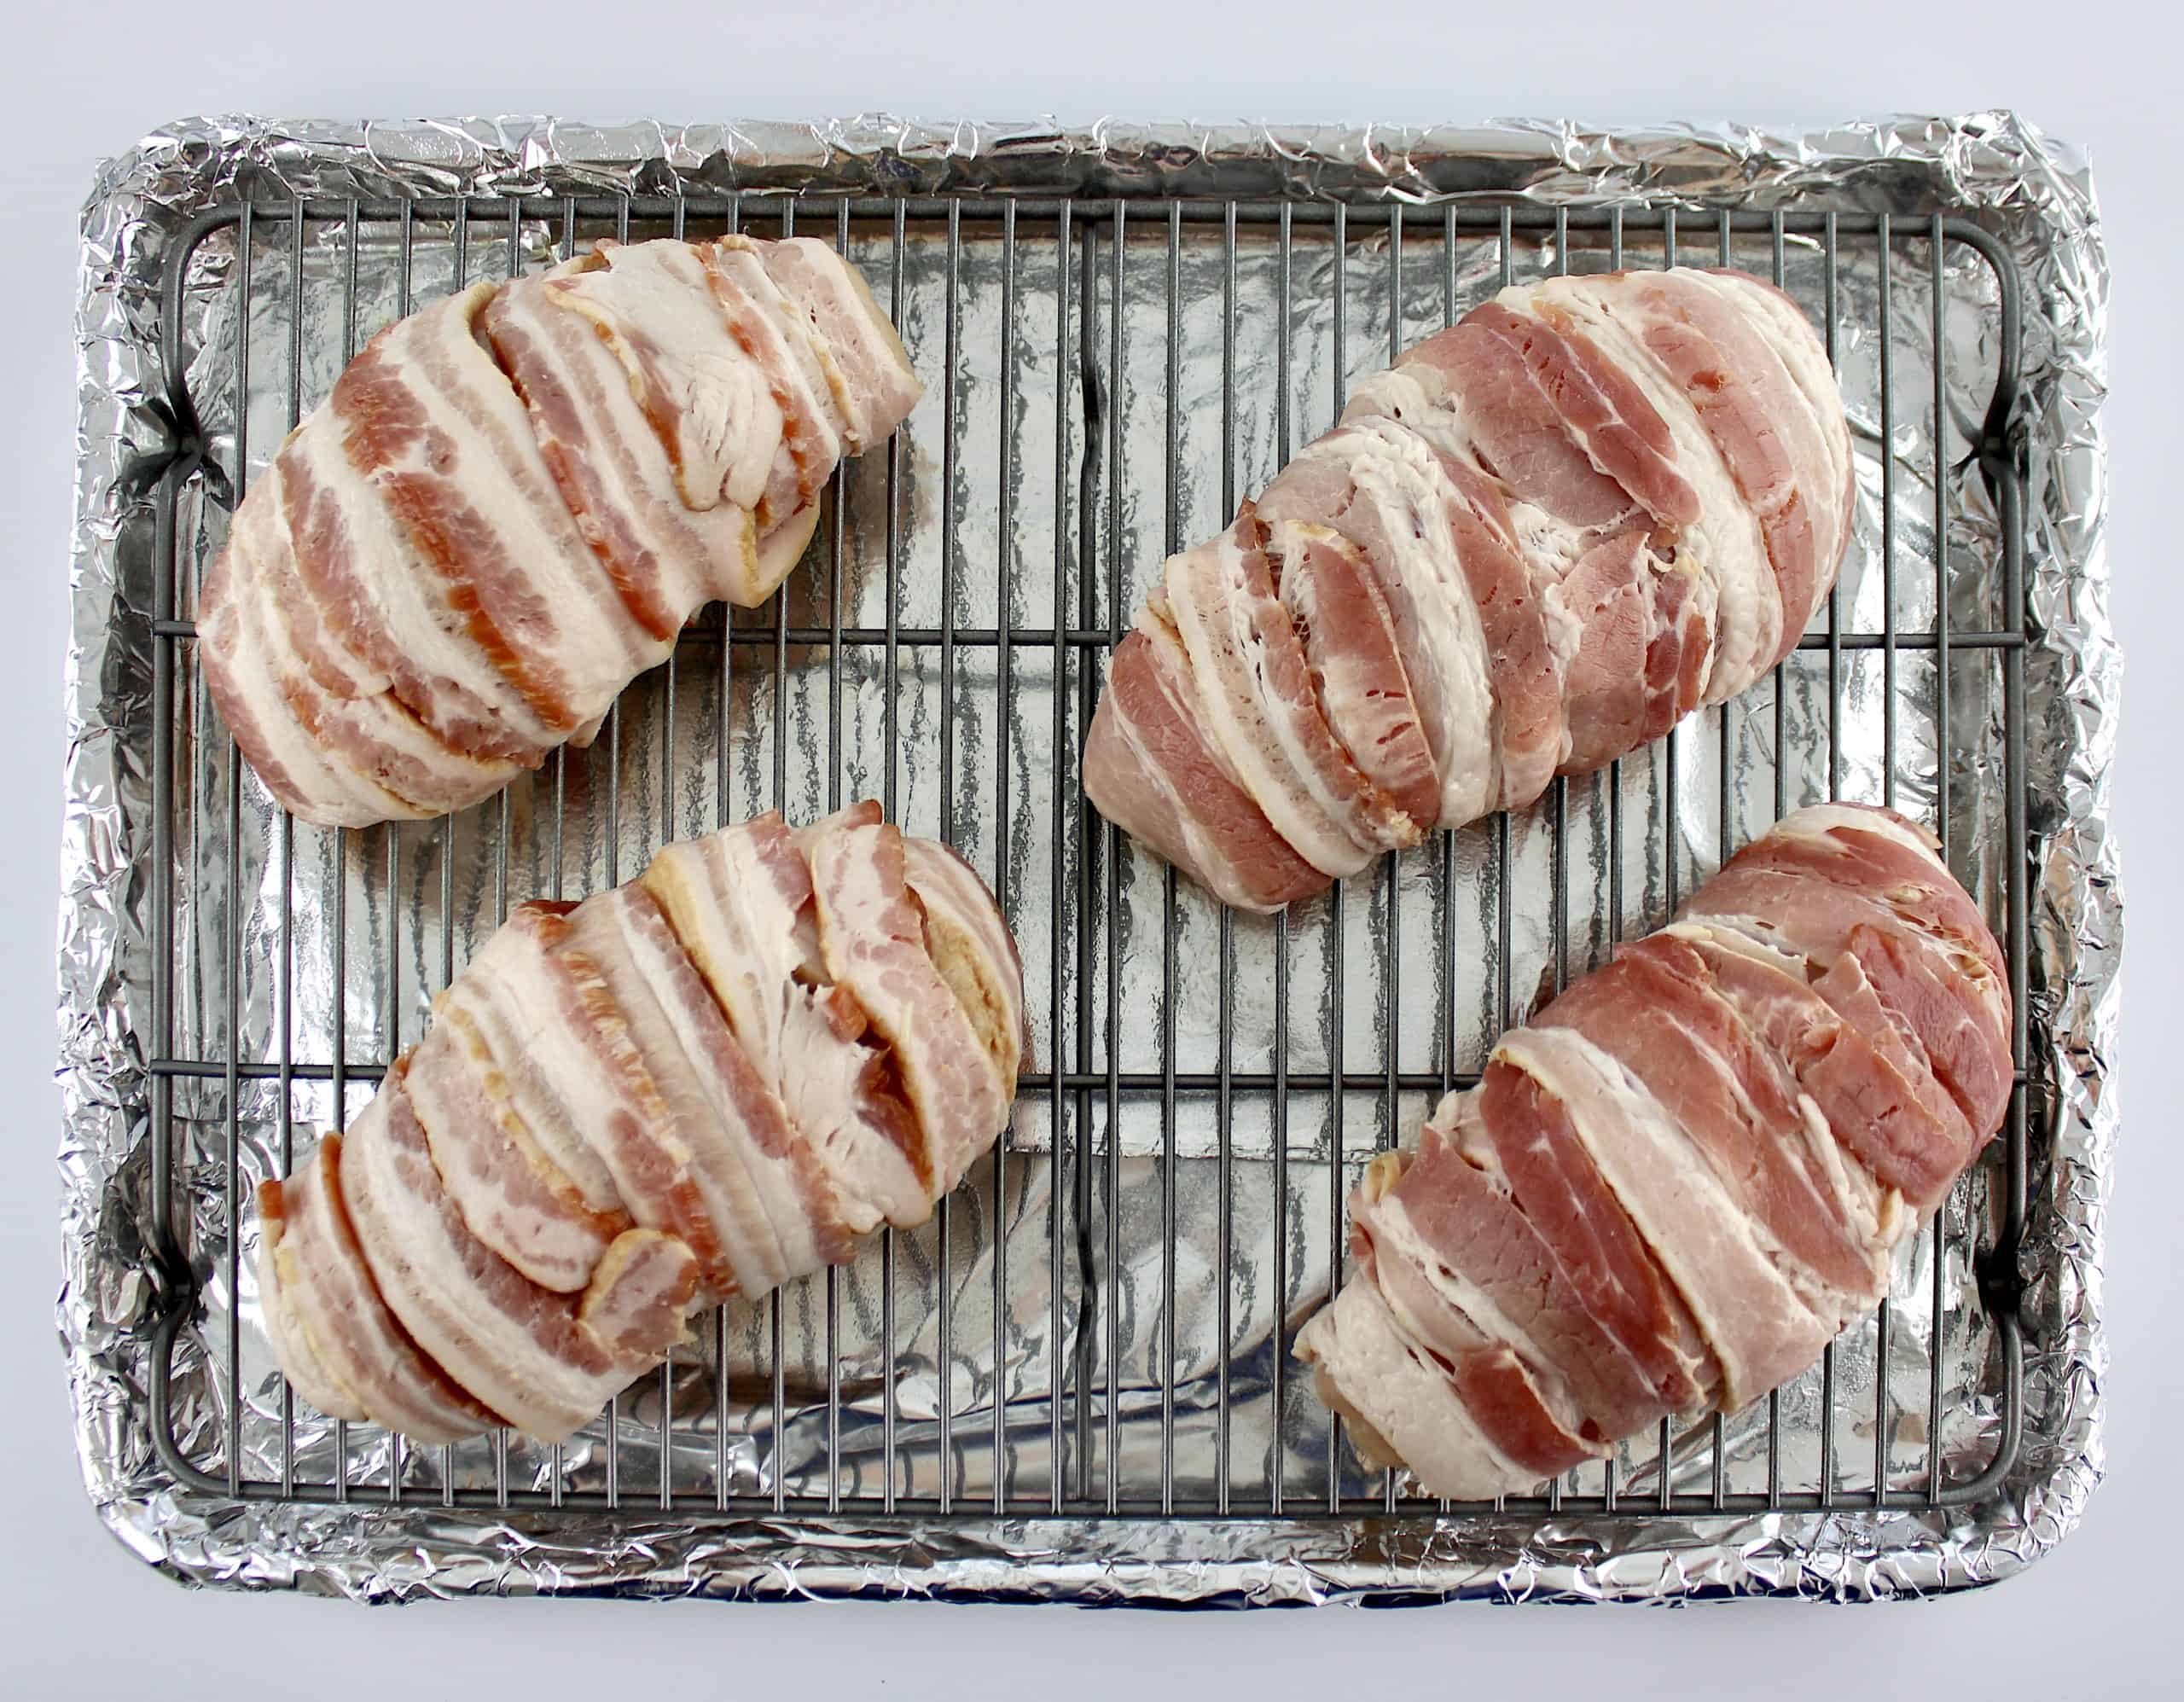 4 bacon wrapped chicken breasts on baking rack lined sheet pan